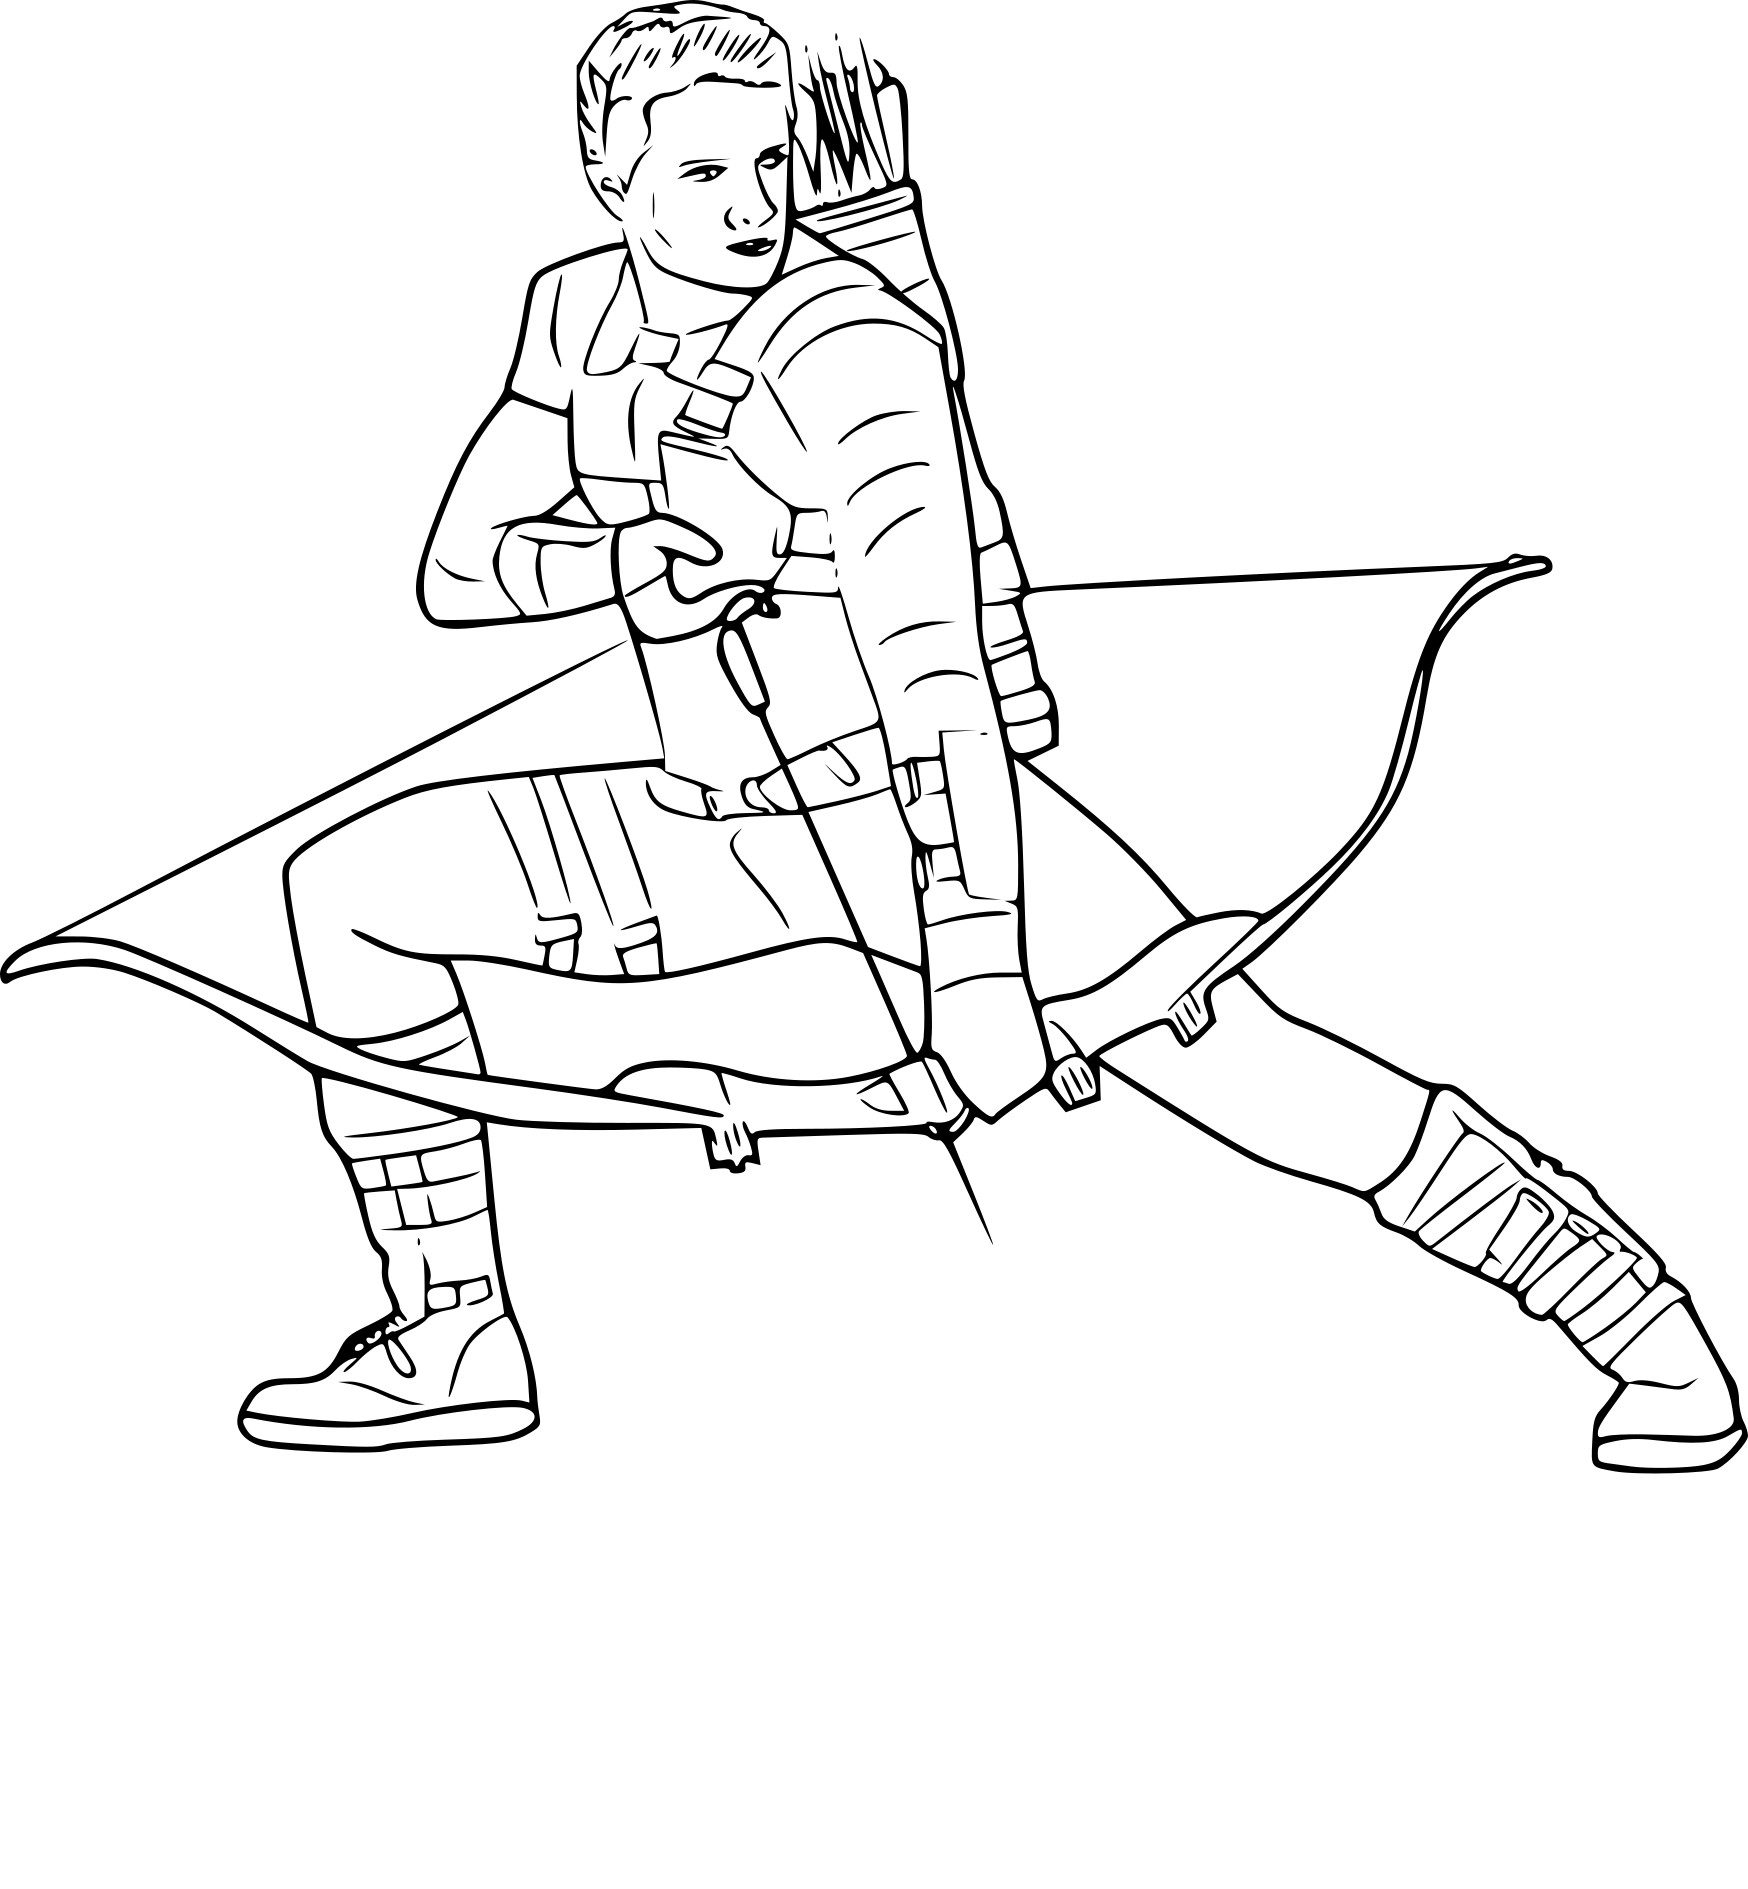 Hawkeye From Avengers coloring page